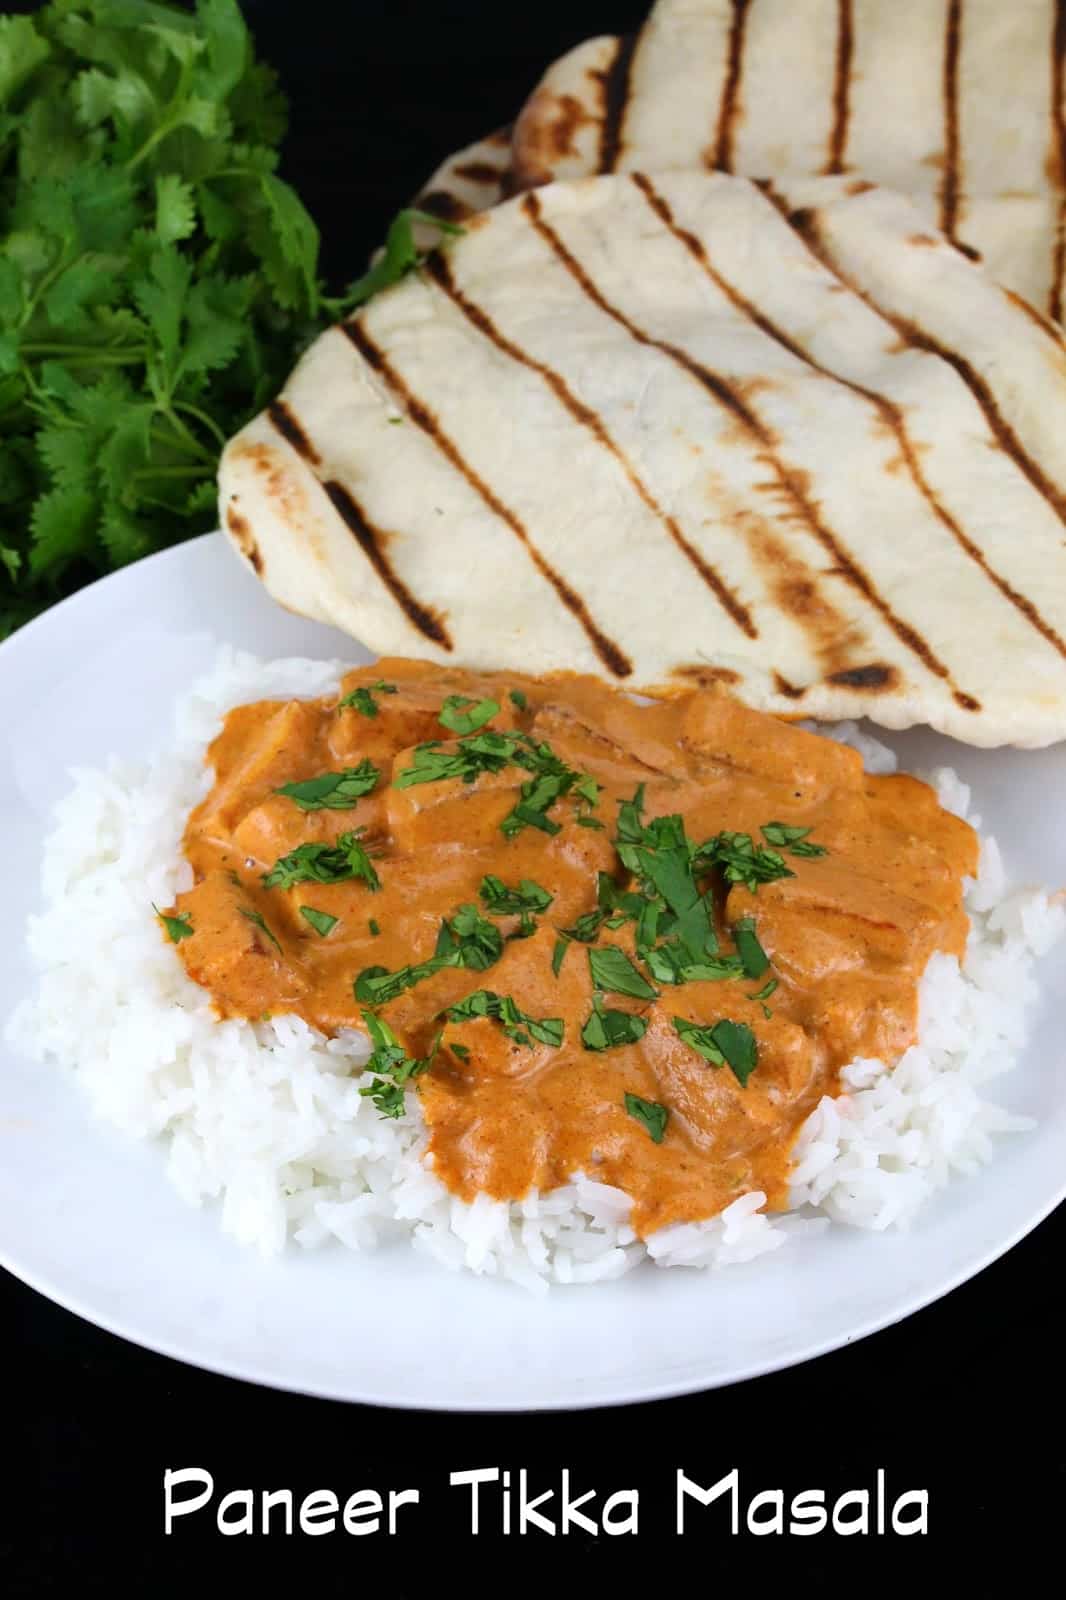 Paneer tikka masala served over white rice on a white plate with naan on the side and a text overlay that reads "Paneer Tikka Masala"